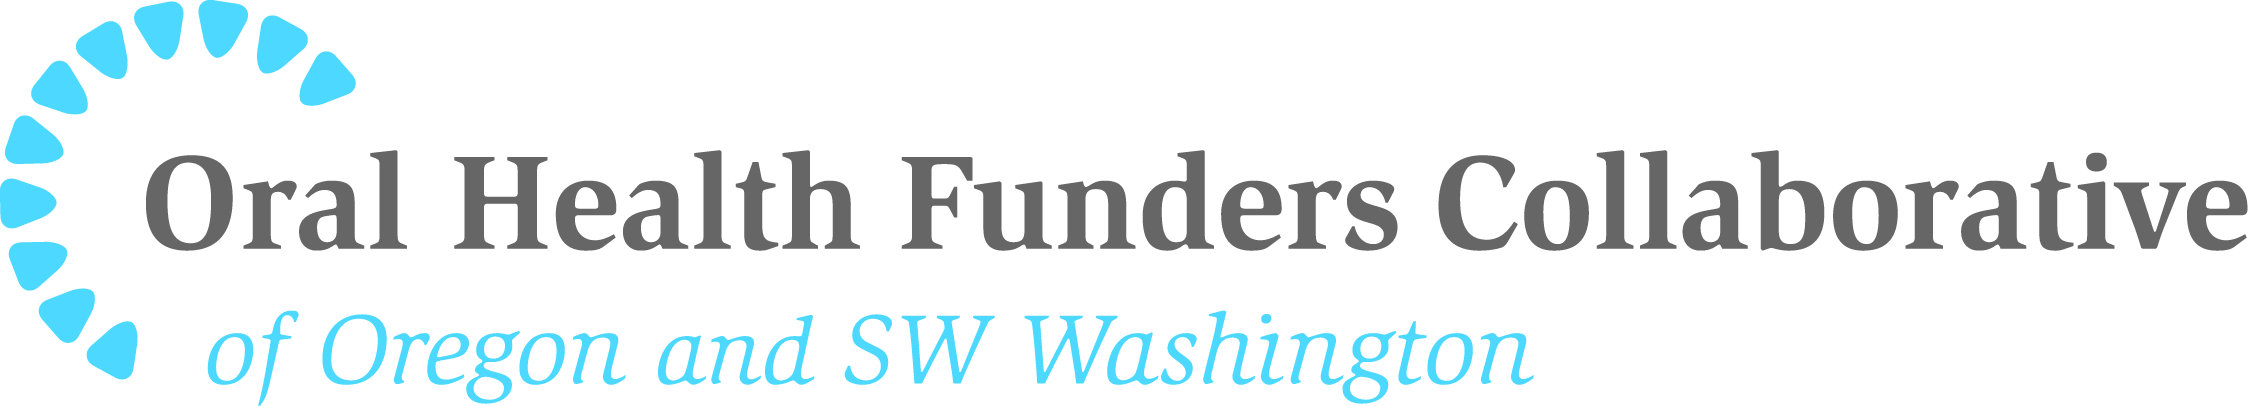 Oral Health Funders Collaborative